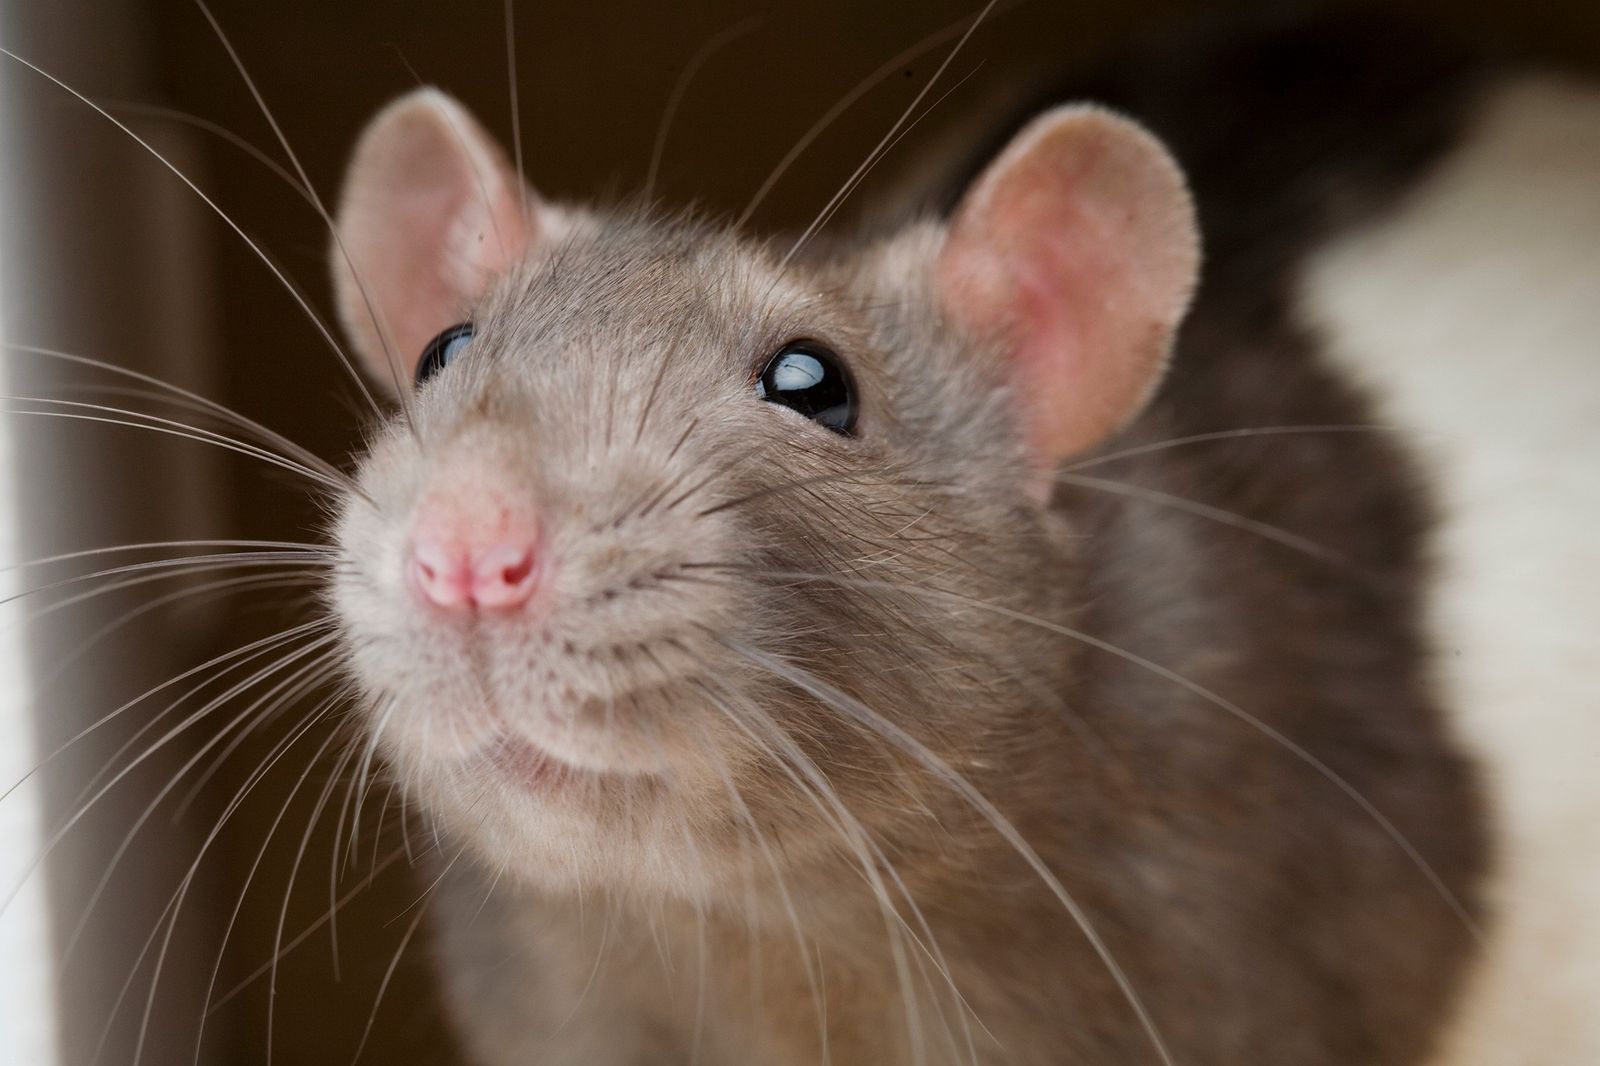 Manchester ranks 6th in the 10 Most Rat-Infested Cities in the UK, The Manc